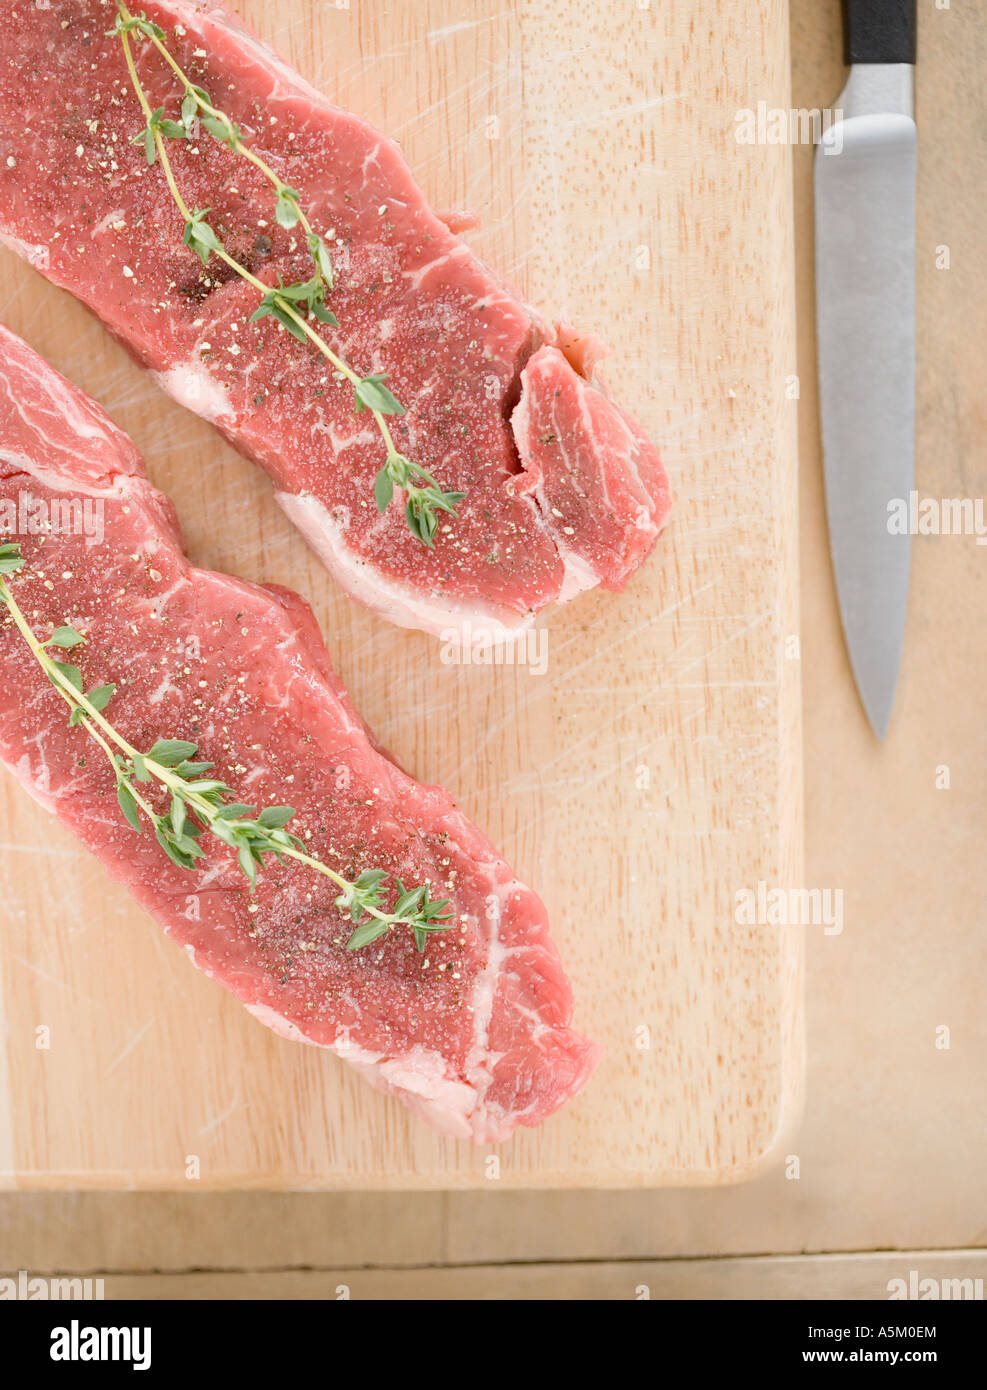 High angle view of meat and spices on cutting board Stock Photo